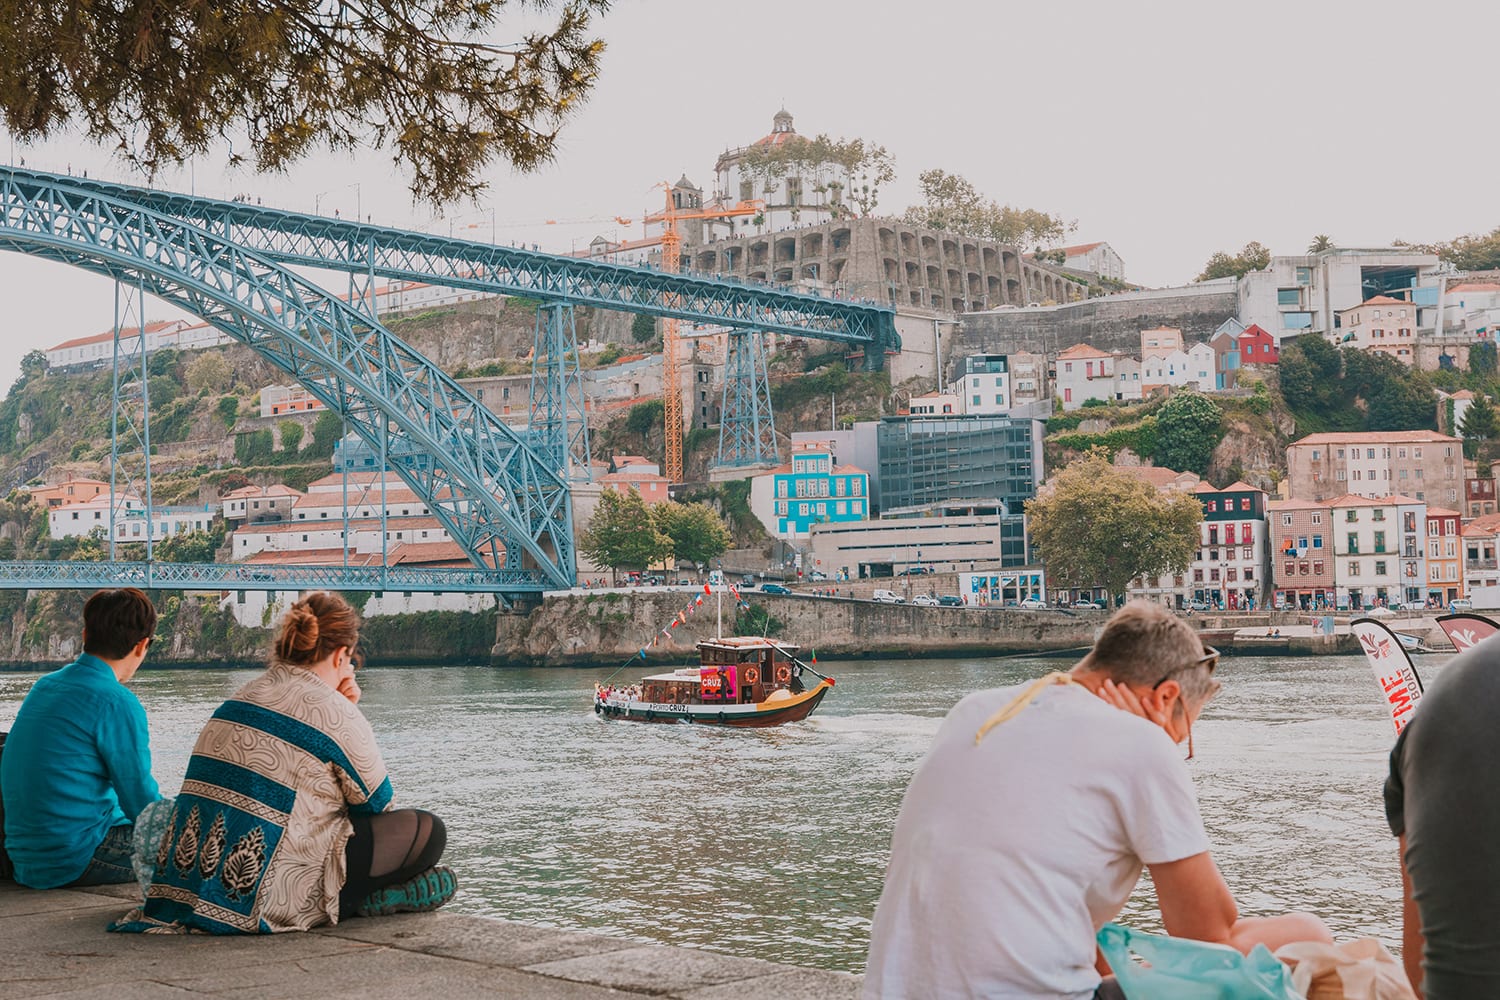 People sitting on the floor with a view to D. Luís I Bridge. In the river there's a small boat passing by.